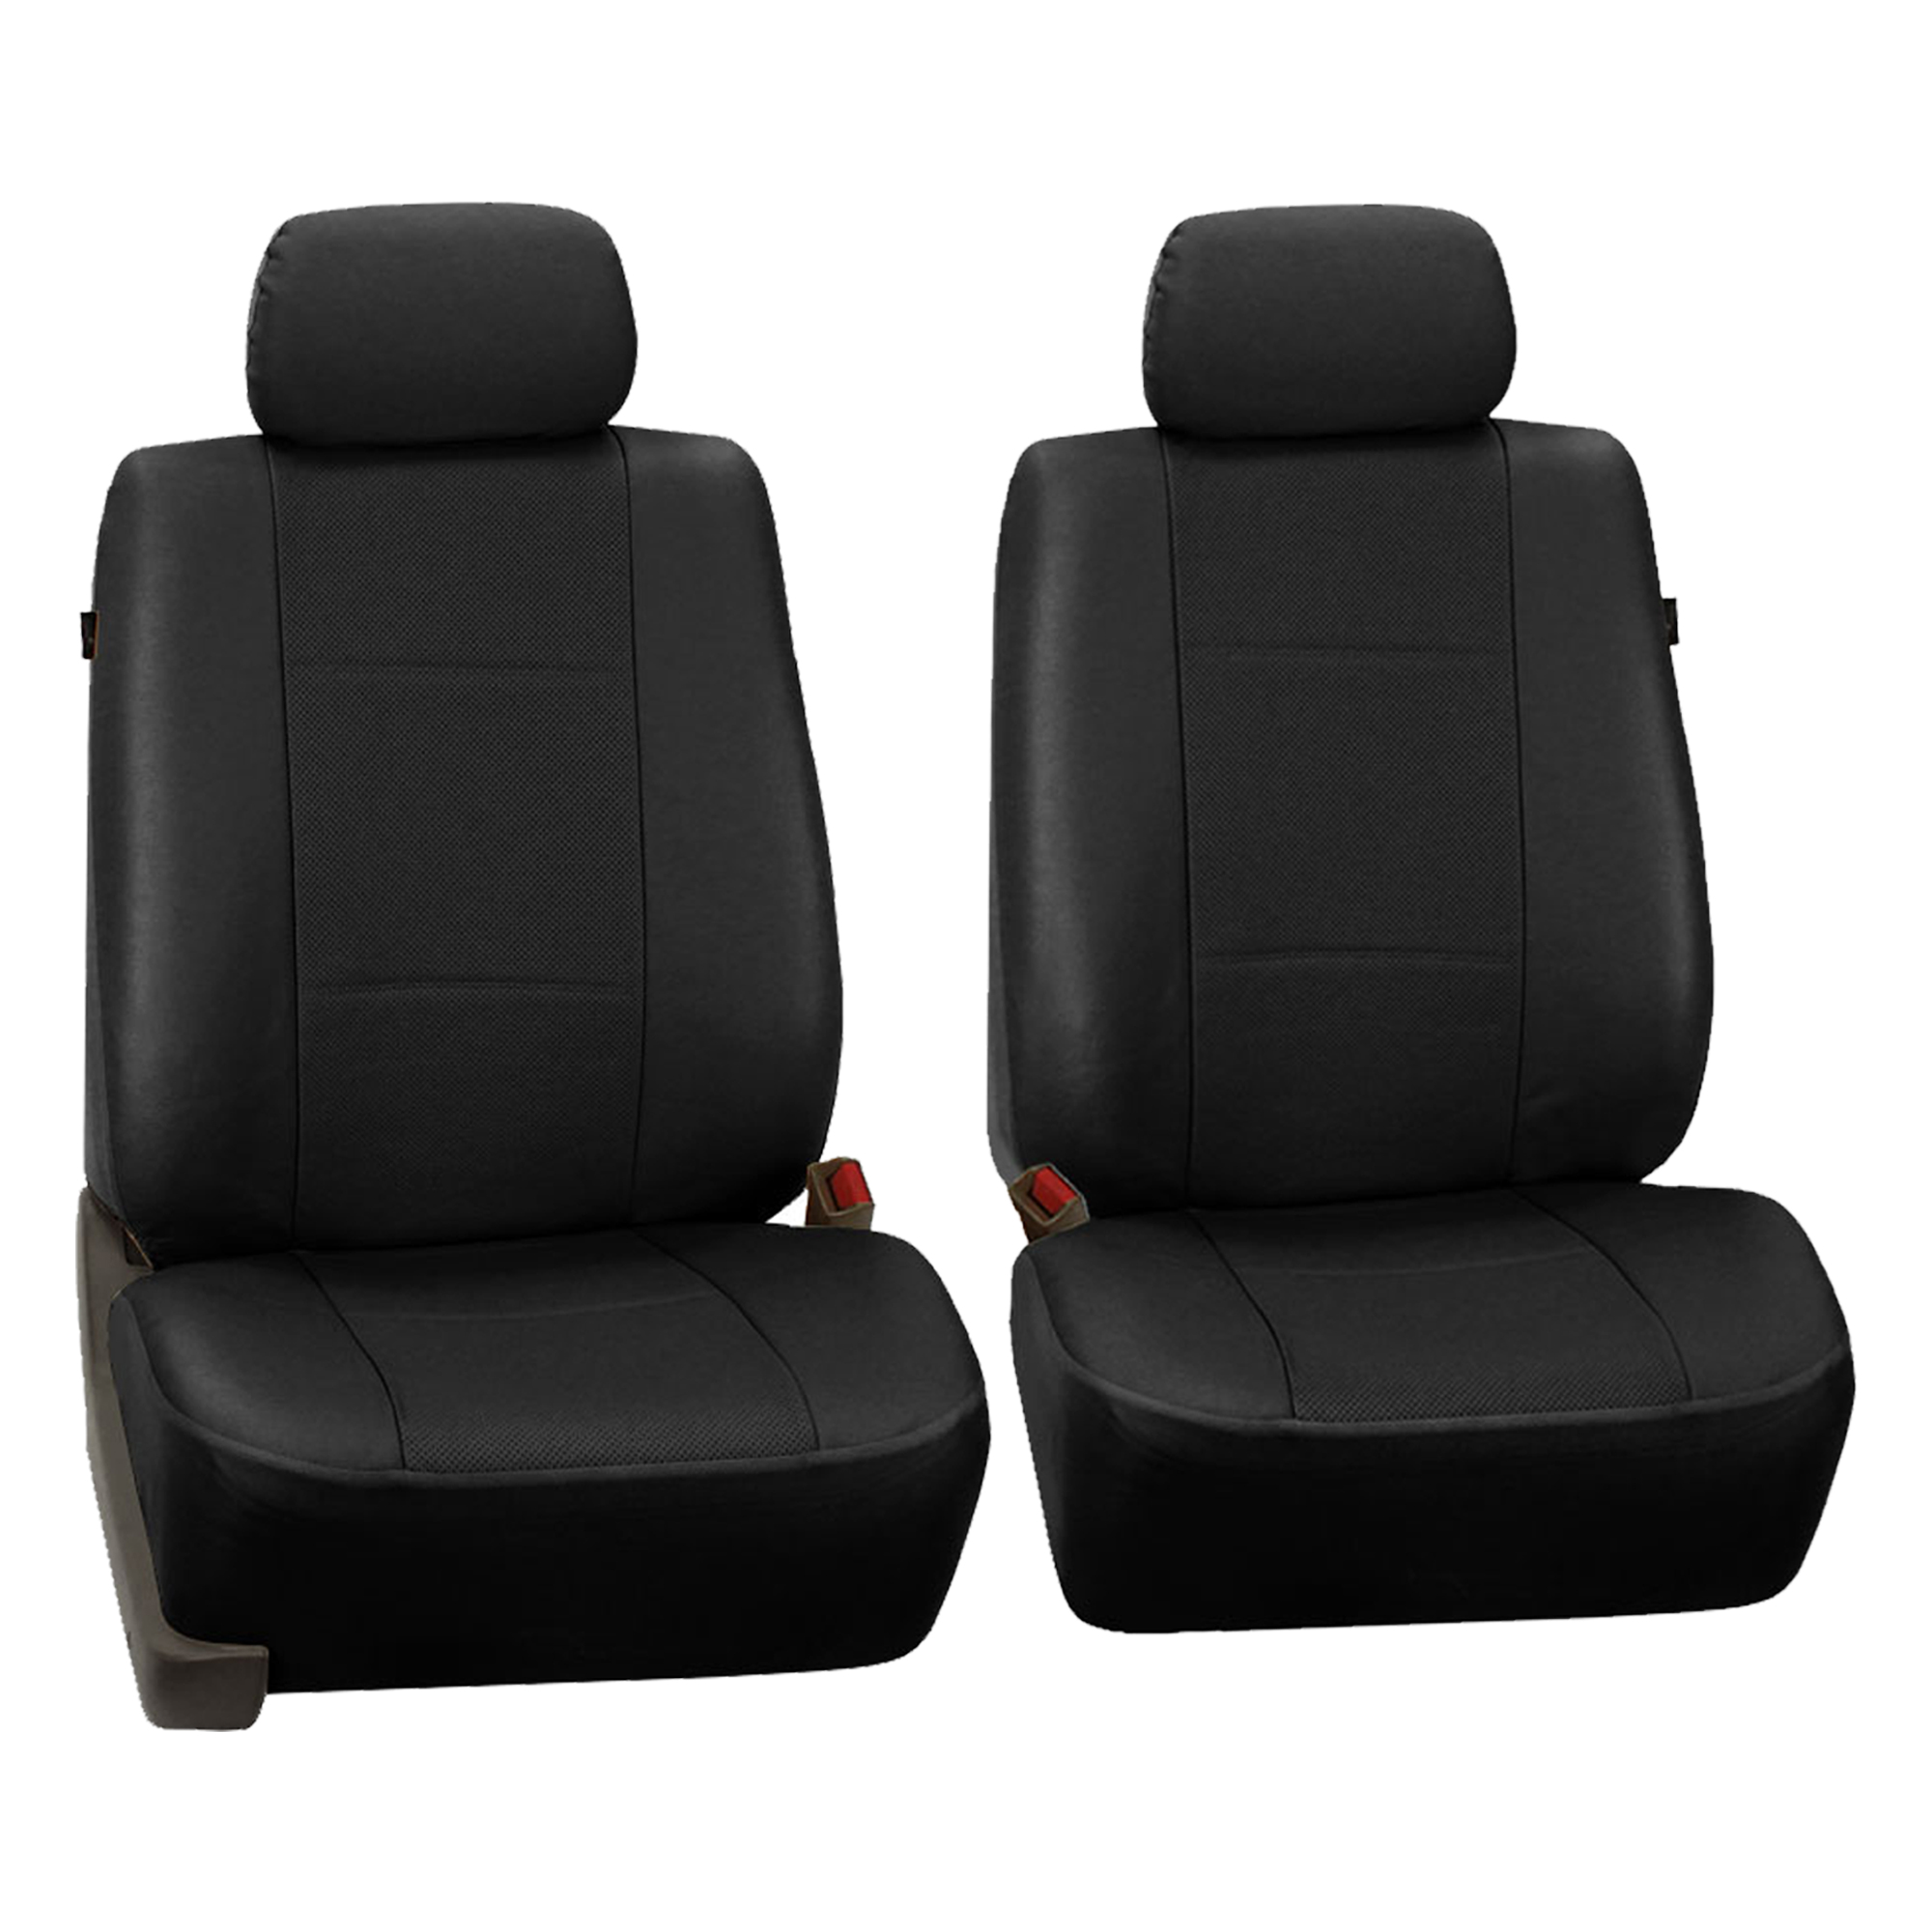 FH Group Universal Fit Deluxe Leatherette Padded Seat Covers For Car Truck SUV Van - Black Front Set - image 1 of 4